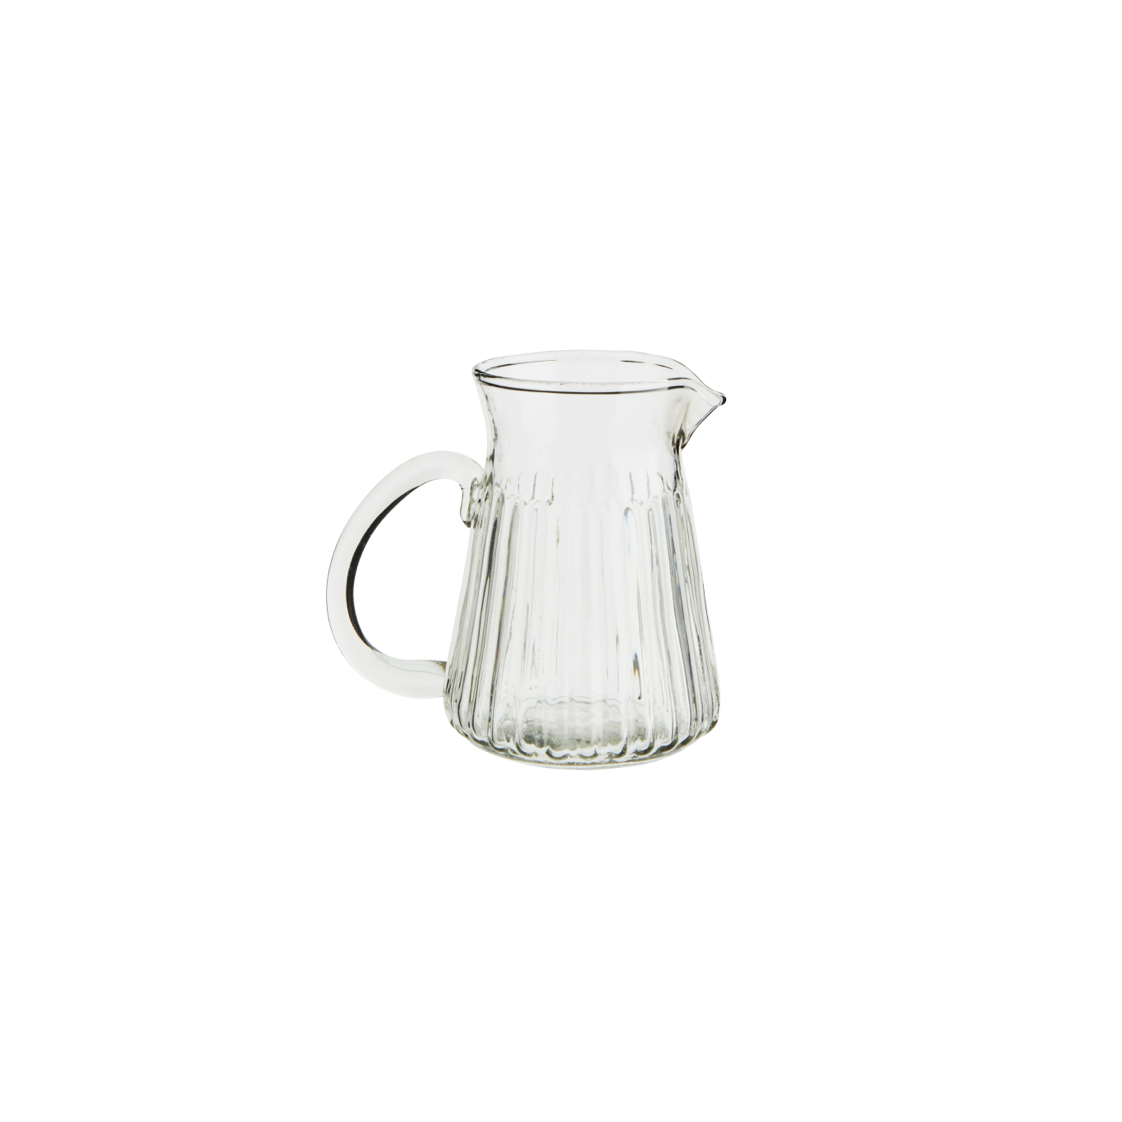 small clear glass jug with a large handle and grooves around the jug